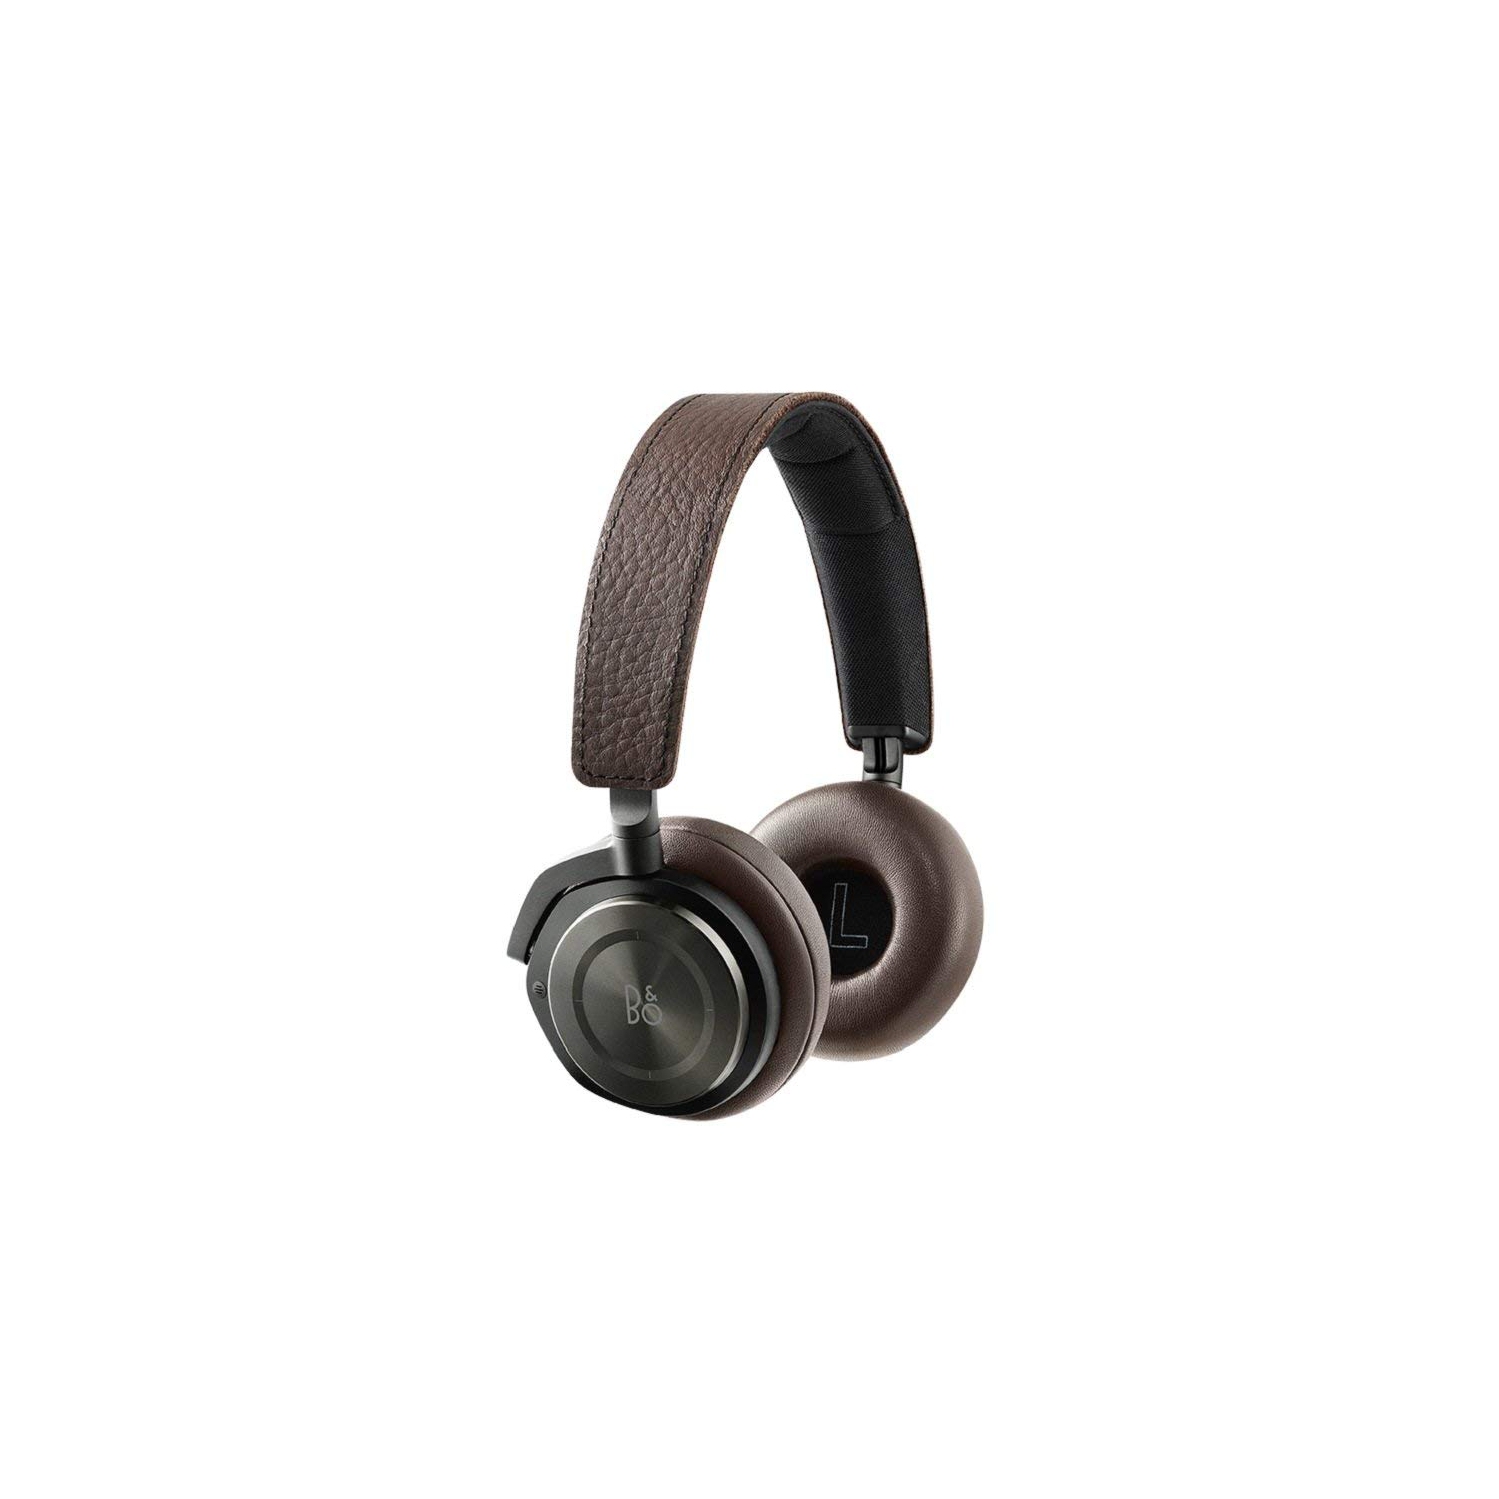 Bang & Olufsen Beoplay H8 Wireless On-Ear Headphone with Active Noise Cancelling - Grey Hazel